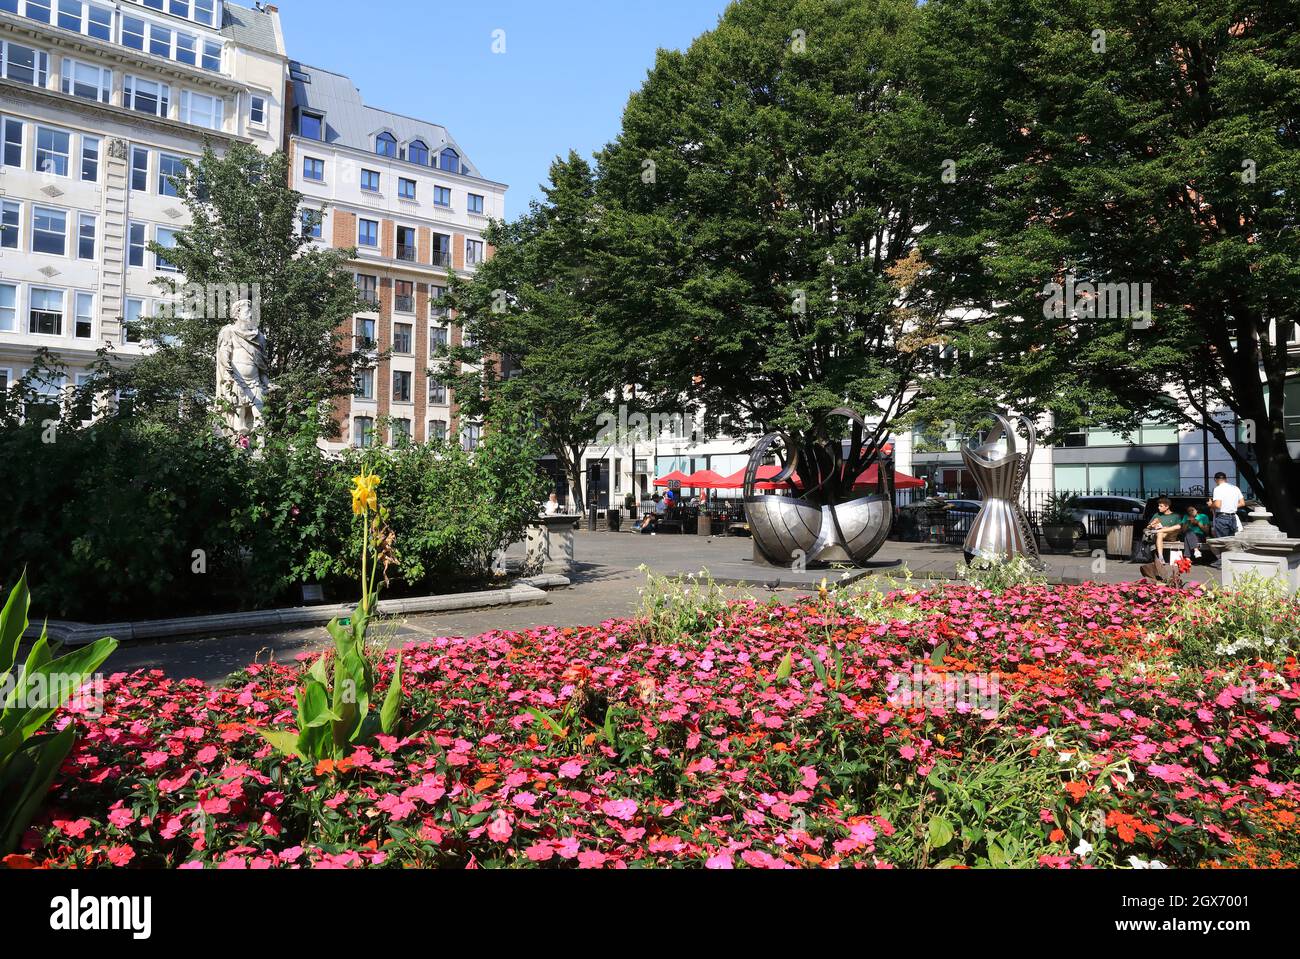 Golden Square in Soho, City of Westminster, an historical garden square surrounded by classical office buildings and with art installations, London UK Stock Photo